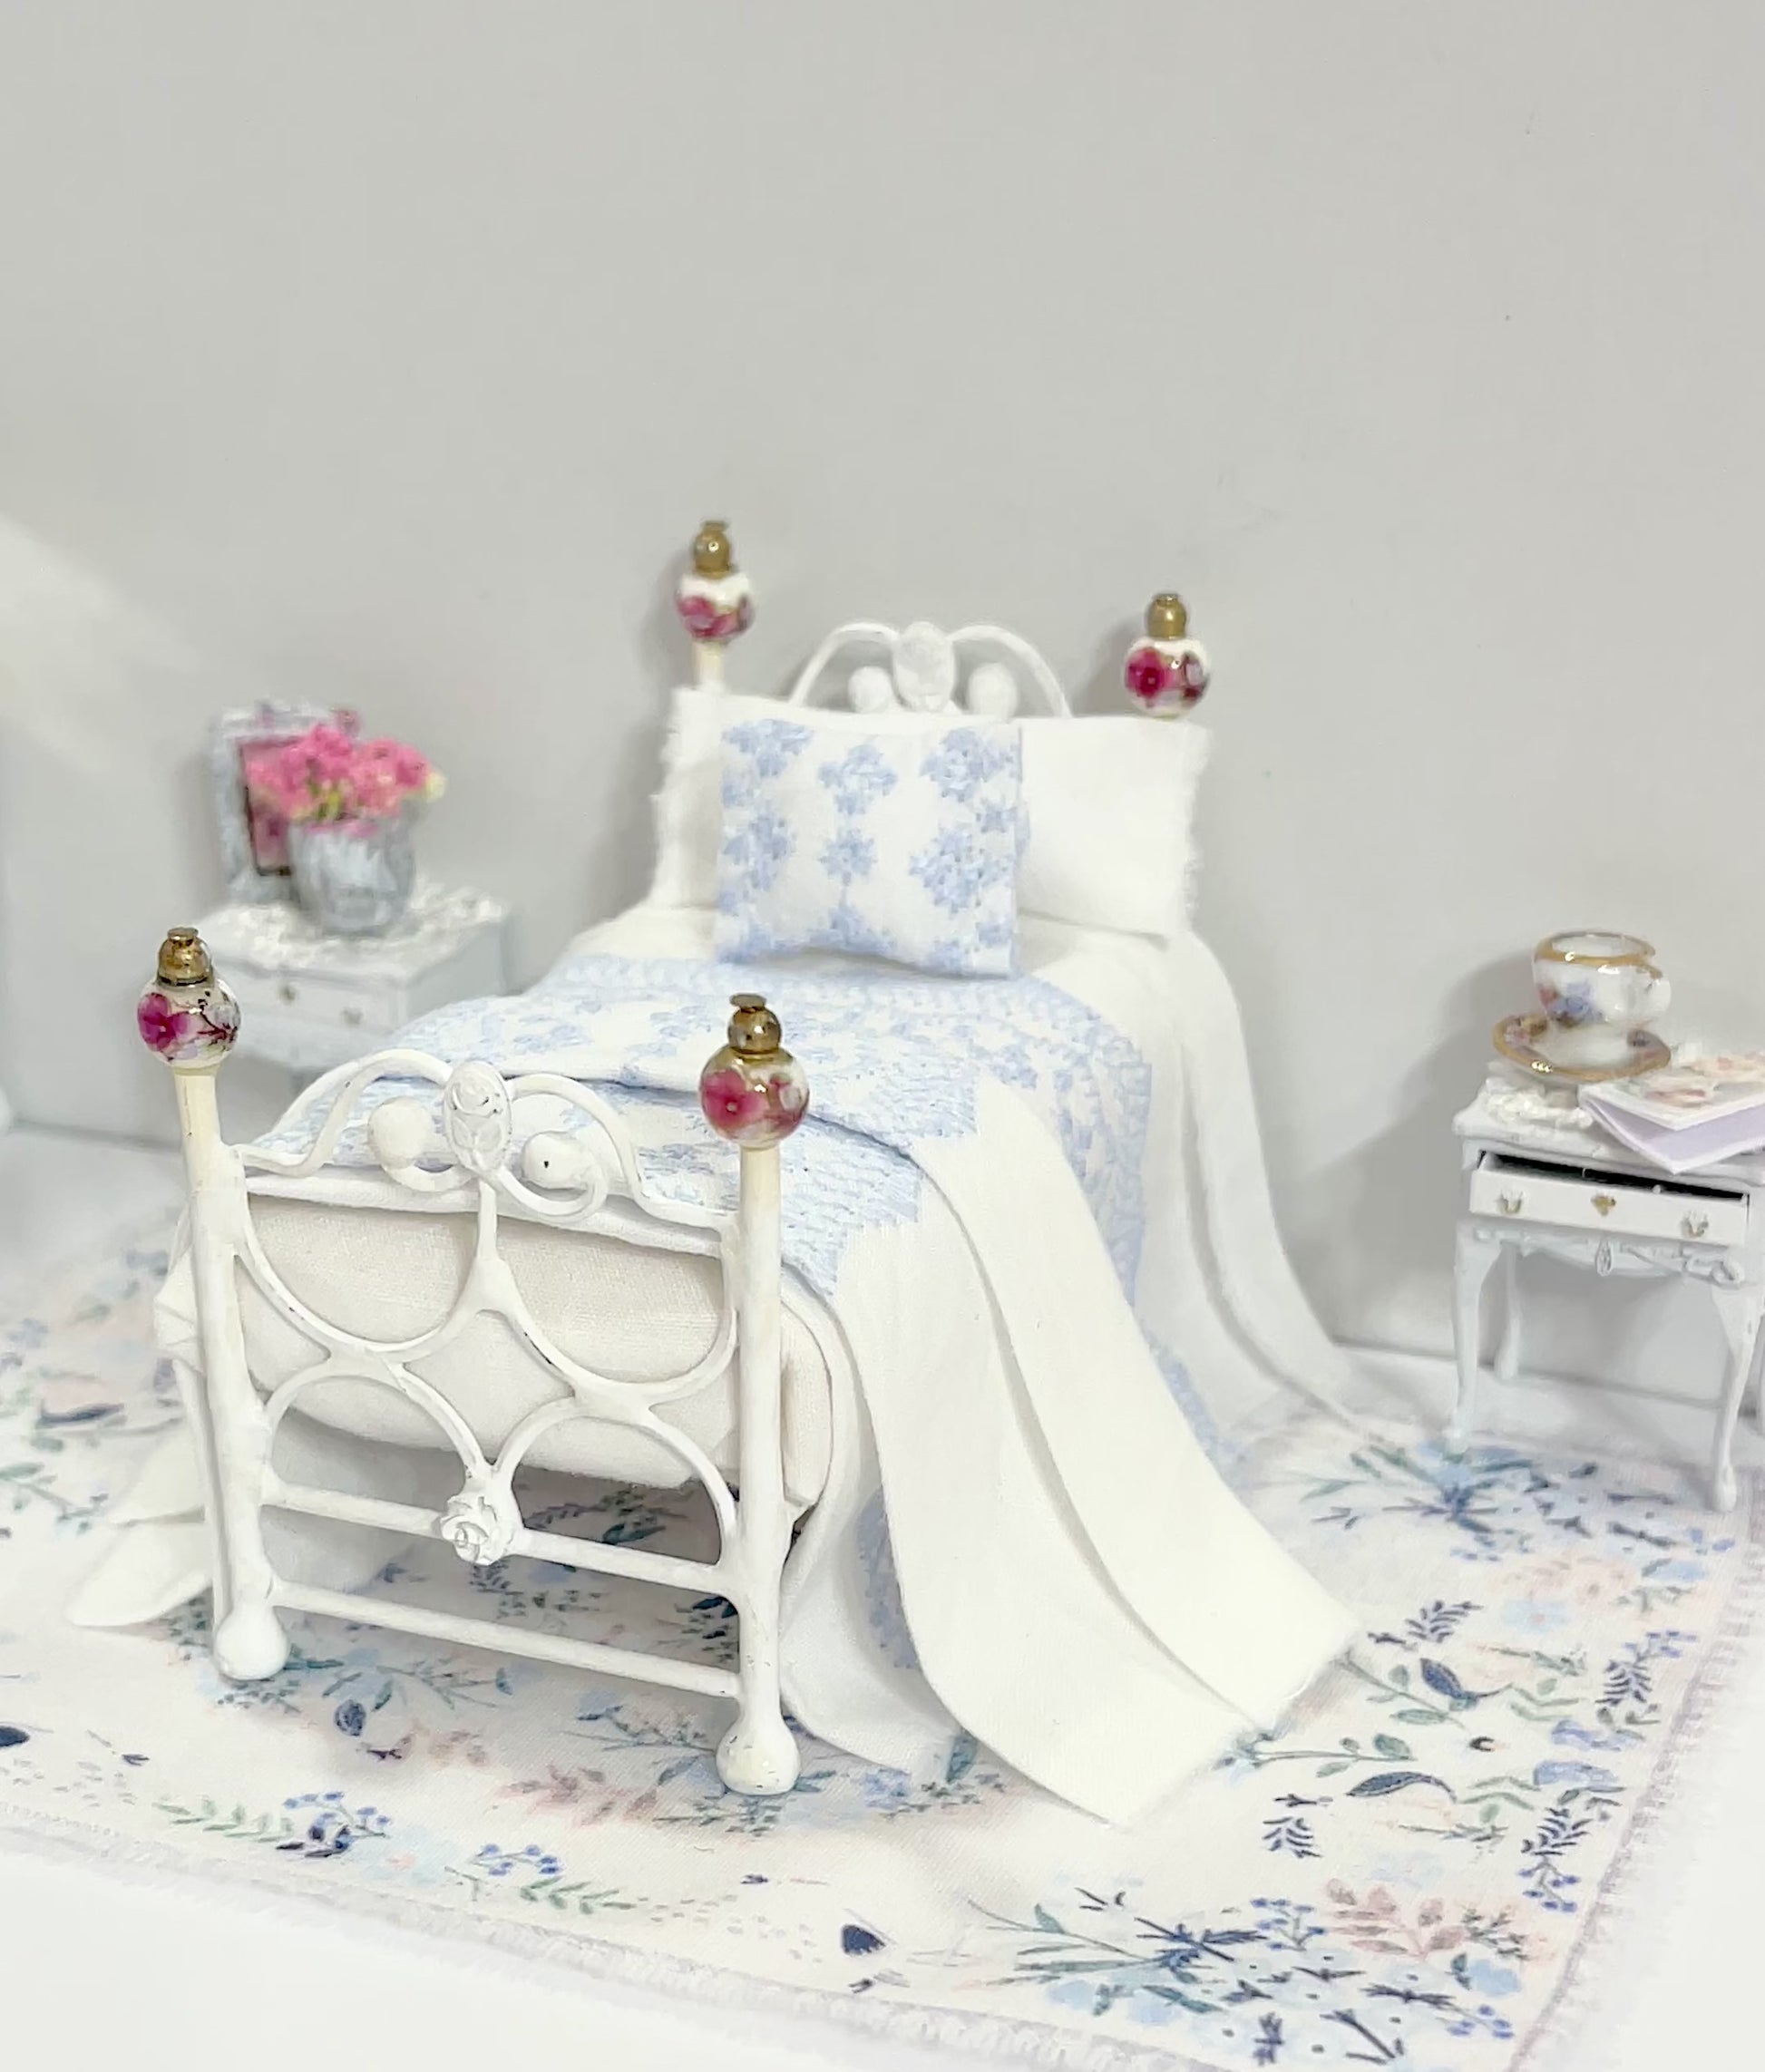 Dollhouse Linens and More, Custom made dollhouse drapes and beds